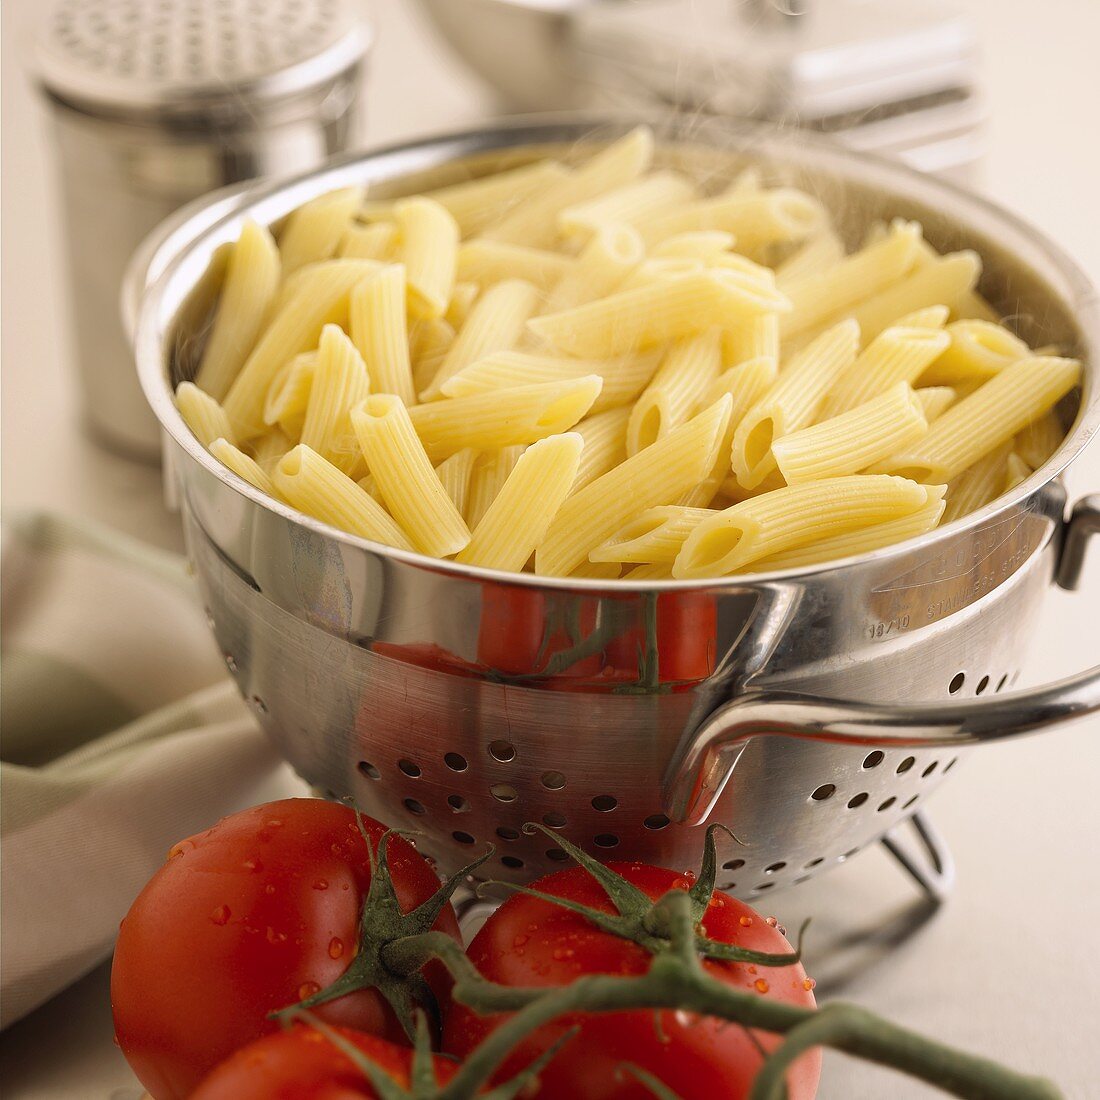 Cooked penne in strainer (steaming), fresh tomatoes beside it